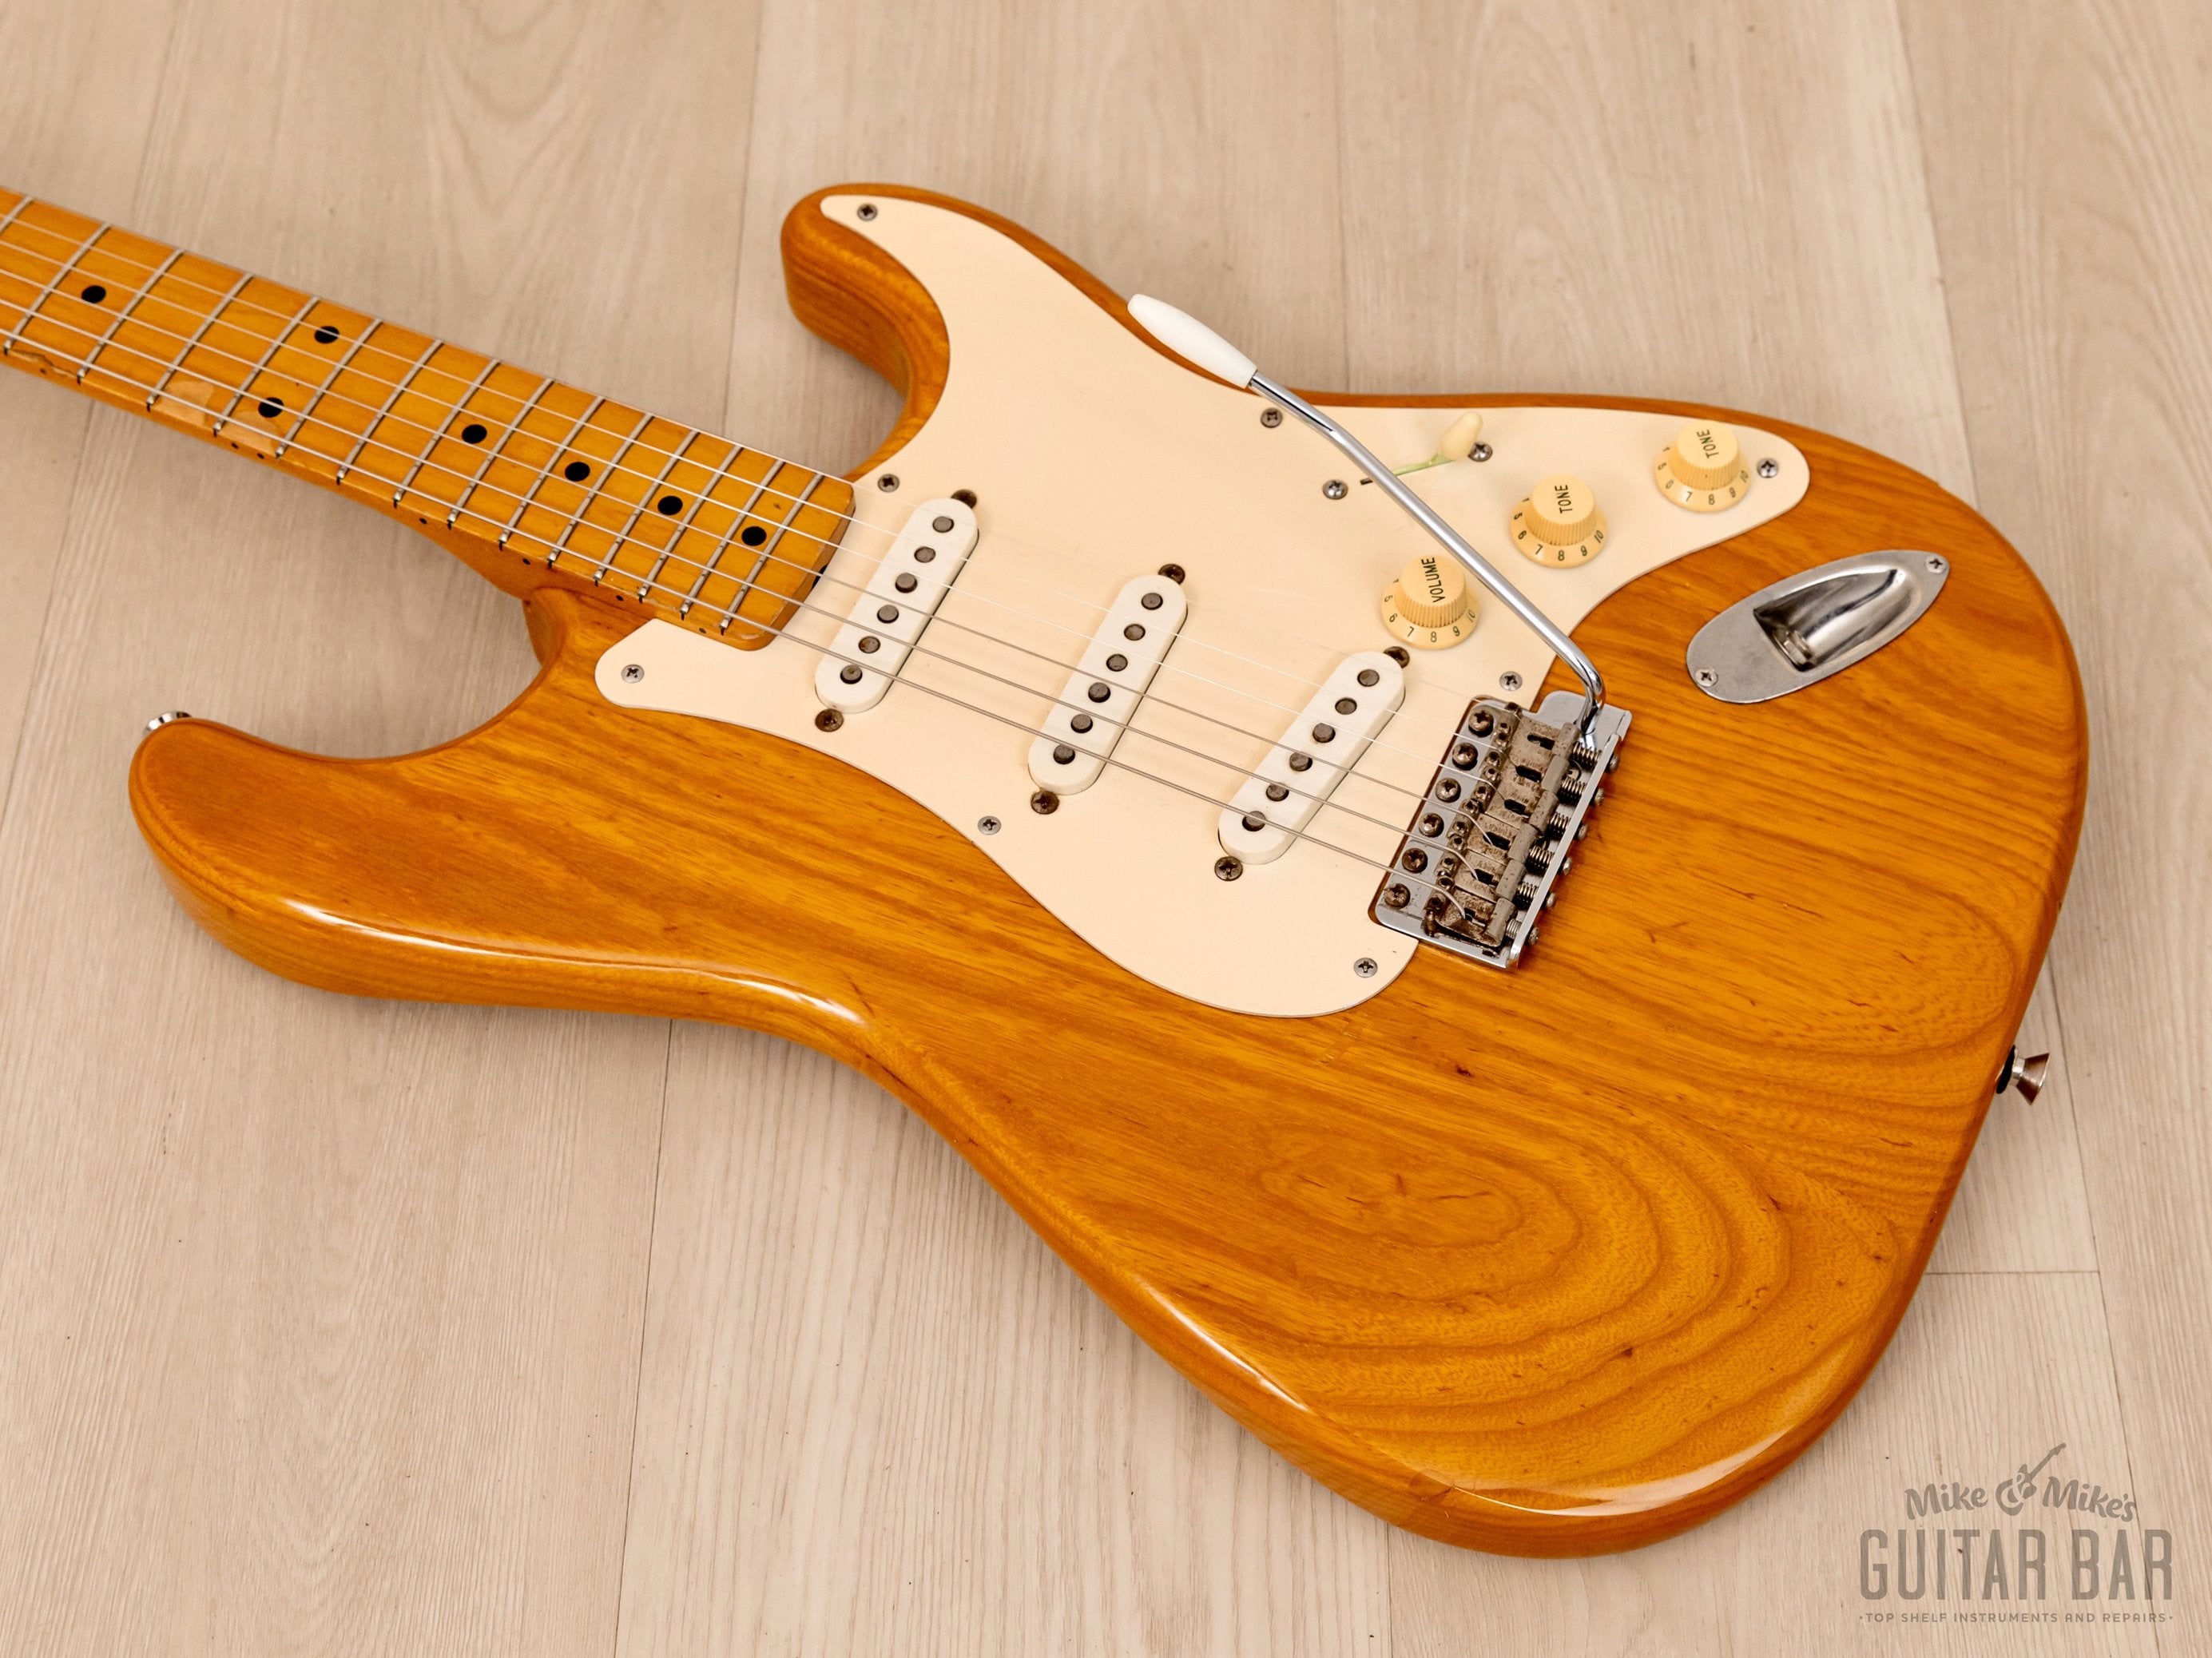 1993 Fender Custom Edition '54 Stratocaster ST54-75RV, USA Pickups, Lacquer Finish & Tweed Case, Japan MIJ